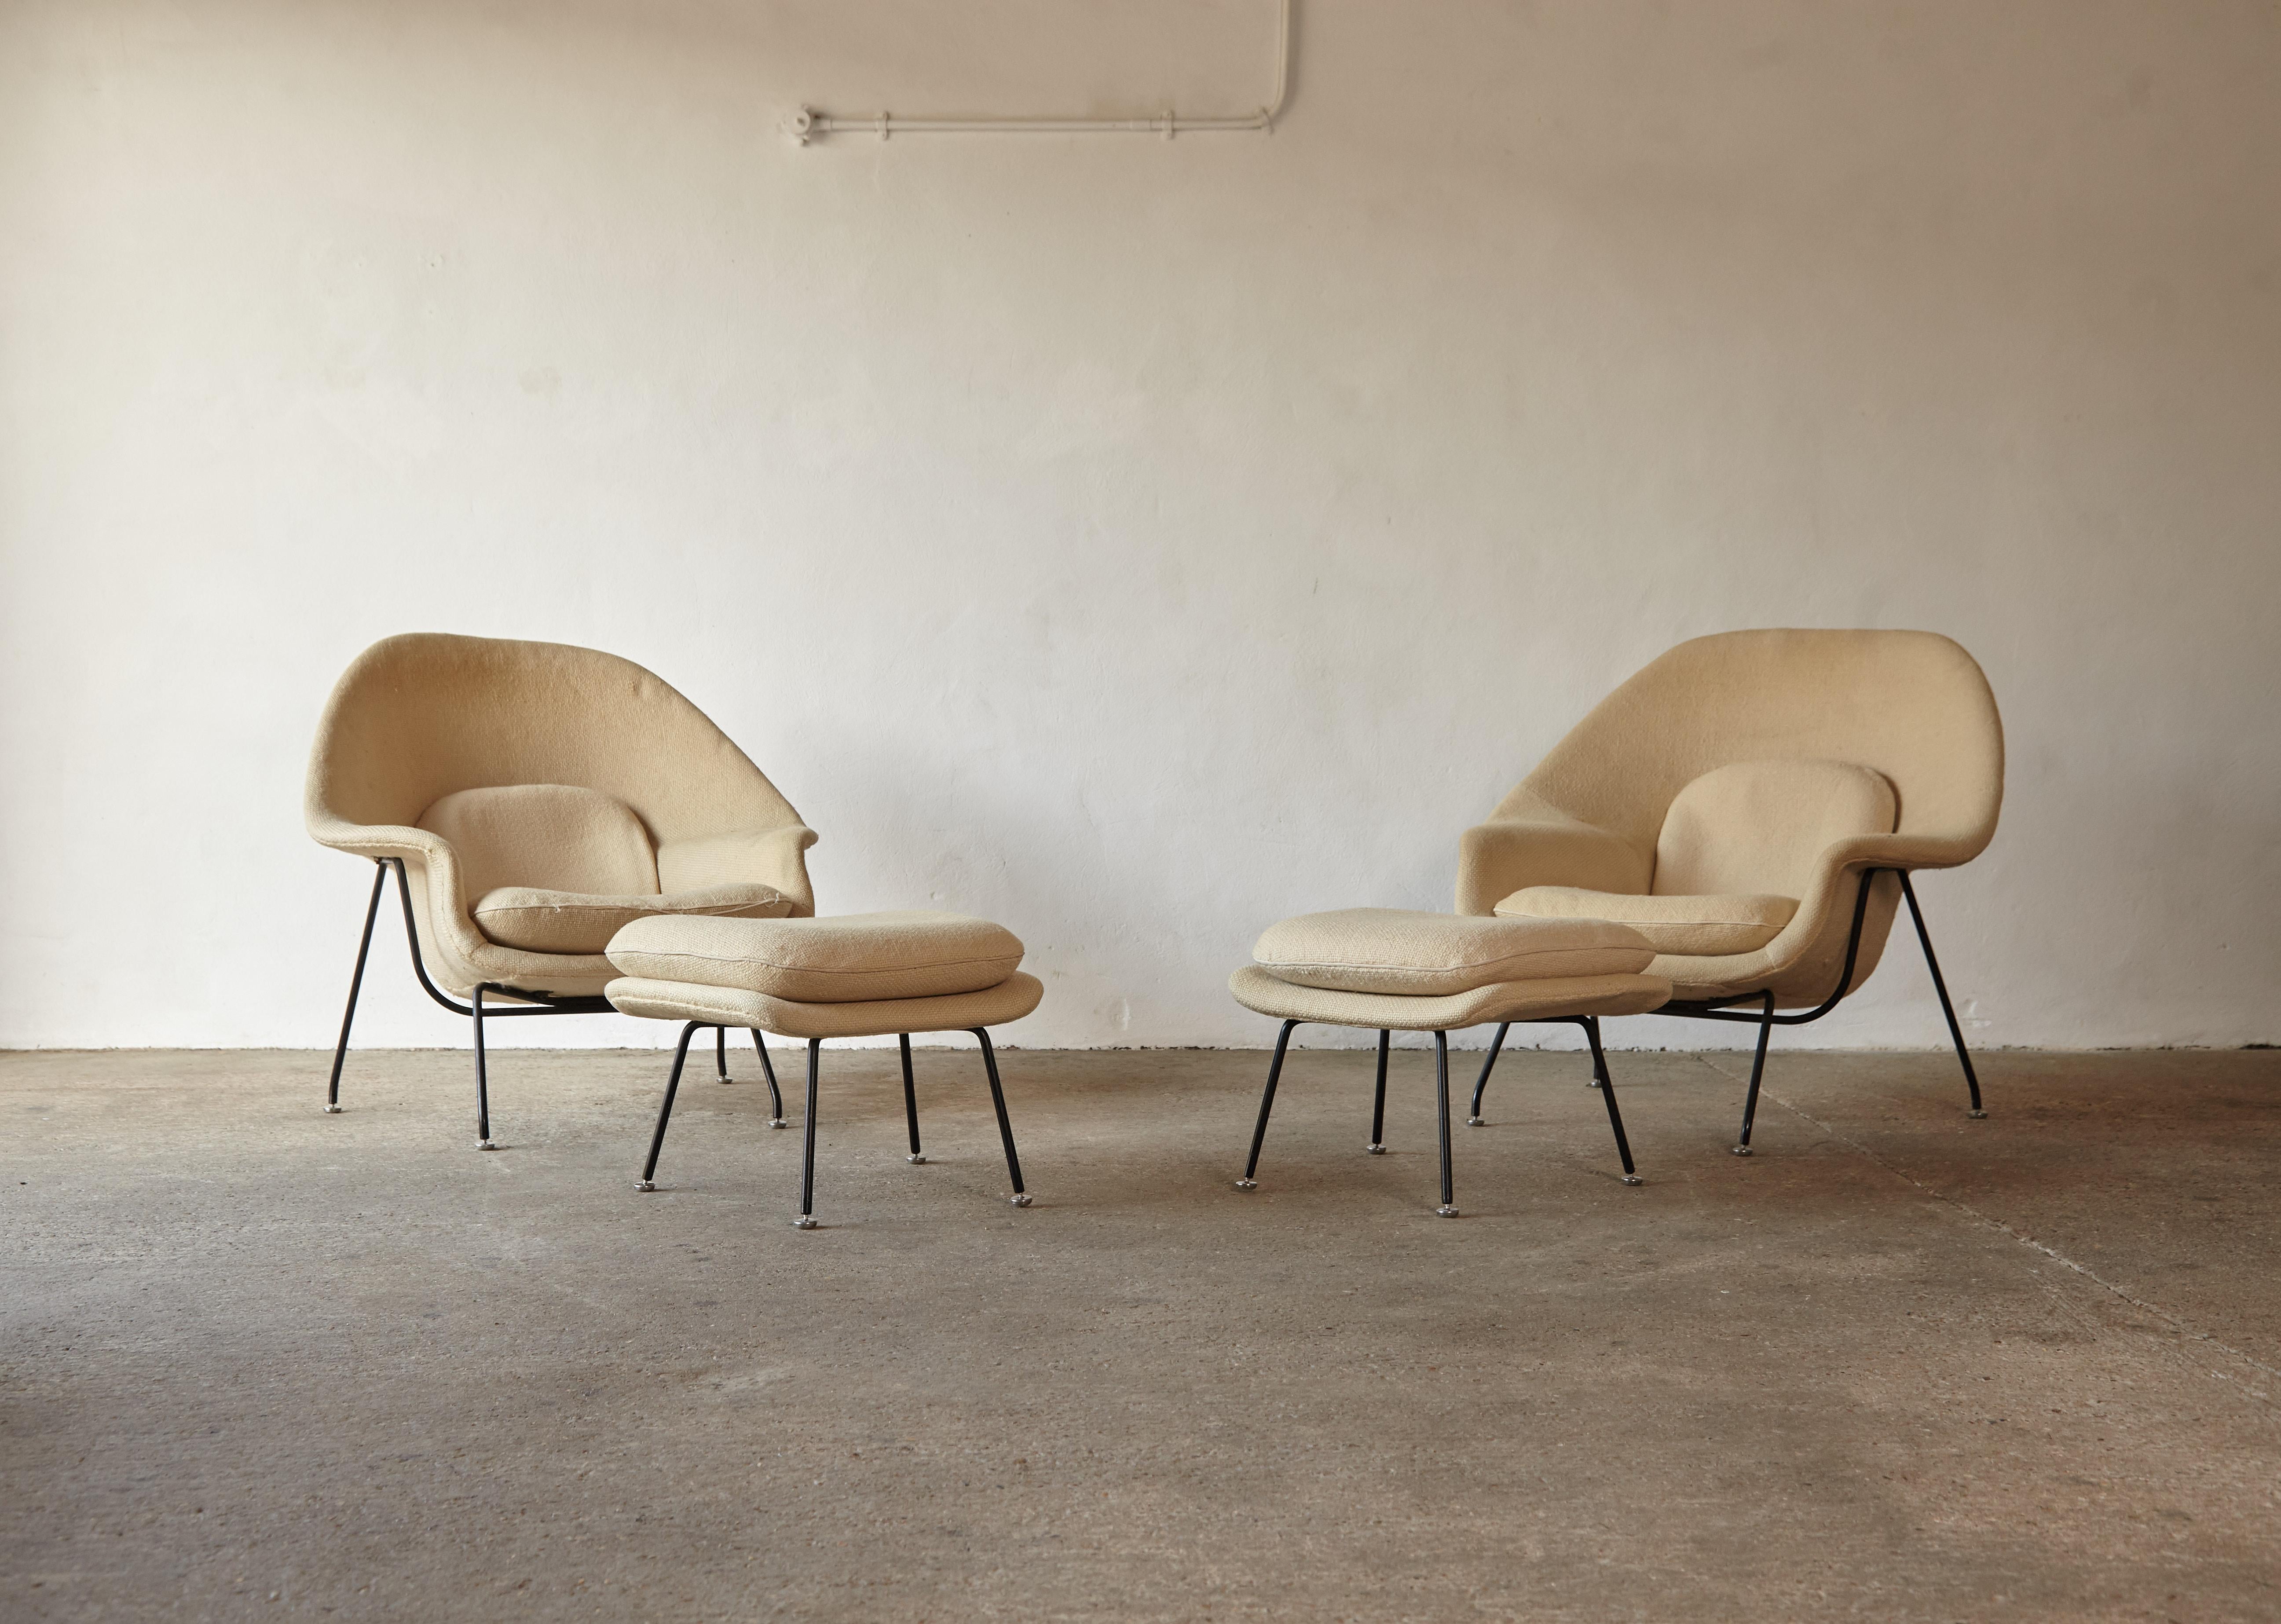 A very rare pair of early production Eero Saarinen womb chairs and ottomans, made by Knoll, USA, 1950s. Original Knoll fabric, fibreglass, black enameled steel frames and first edition feet / glides. Structually sound. The foam is a bit dry on one